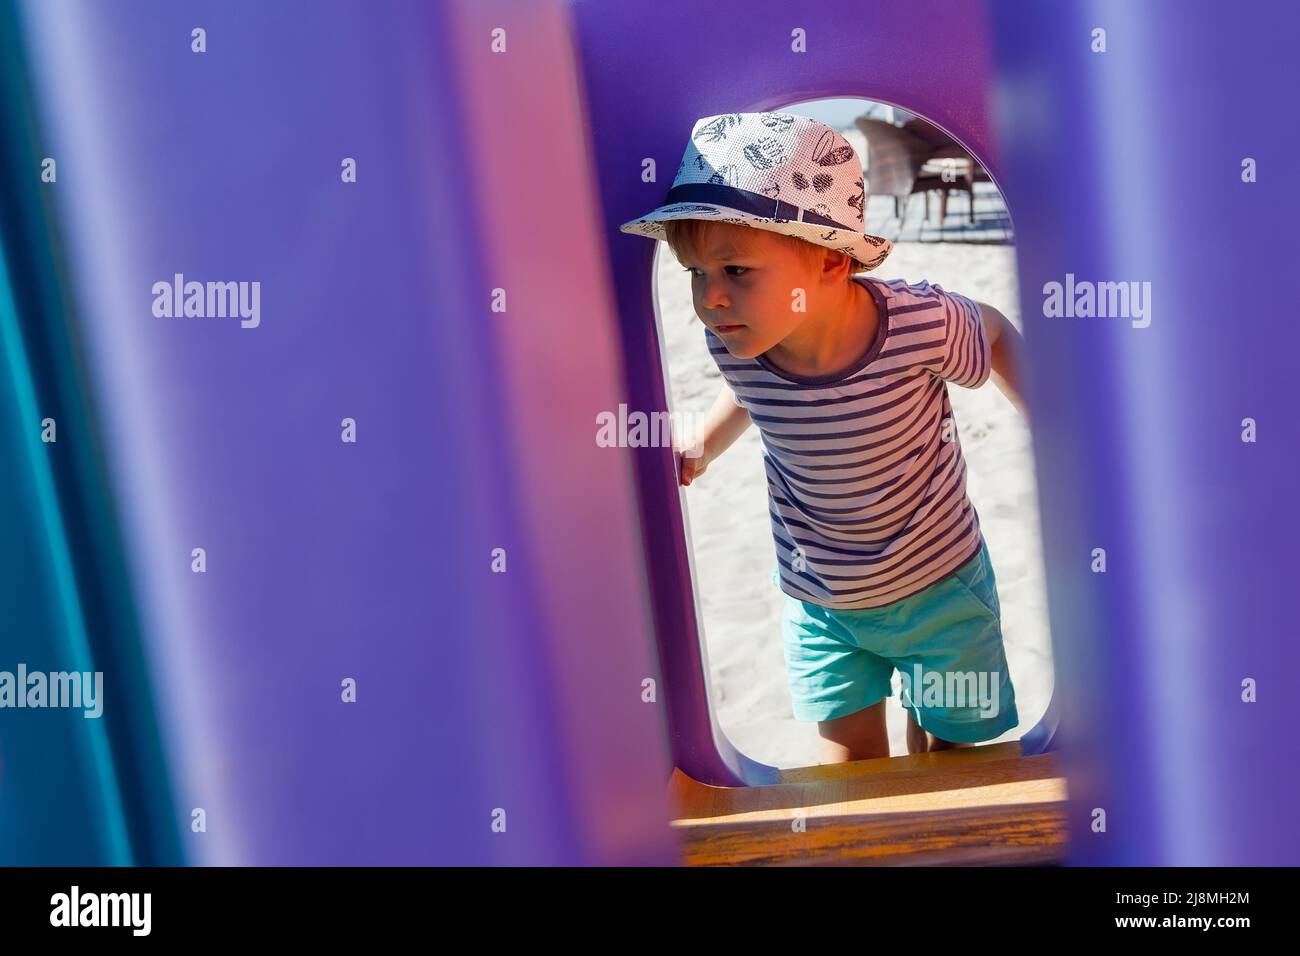 A little boy in a hat looks at the playground through a purple plastic arch. The purple background has free space for the note Stock Photo